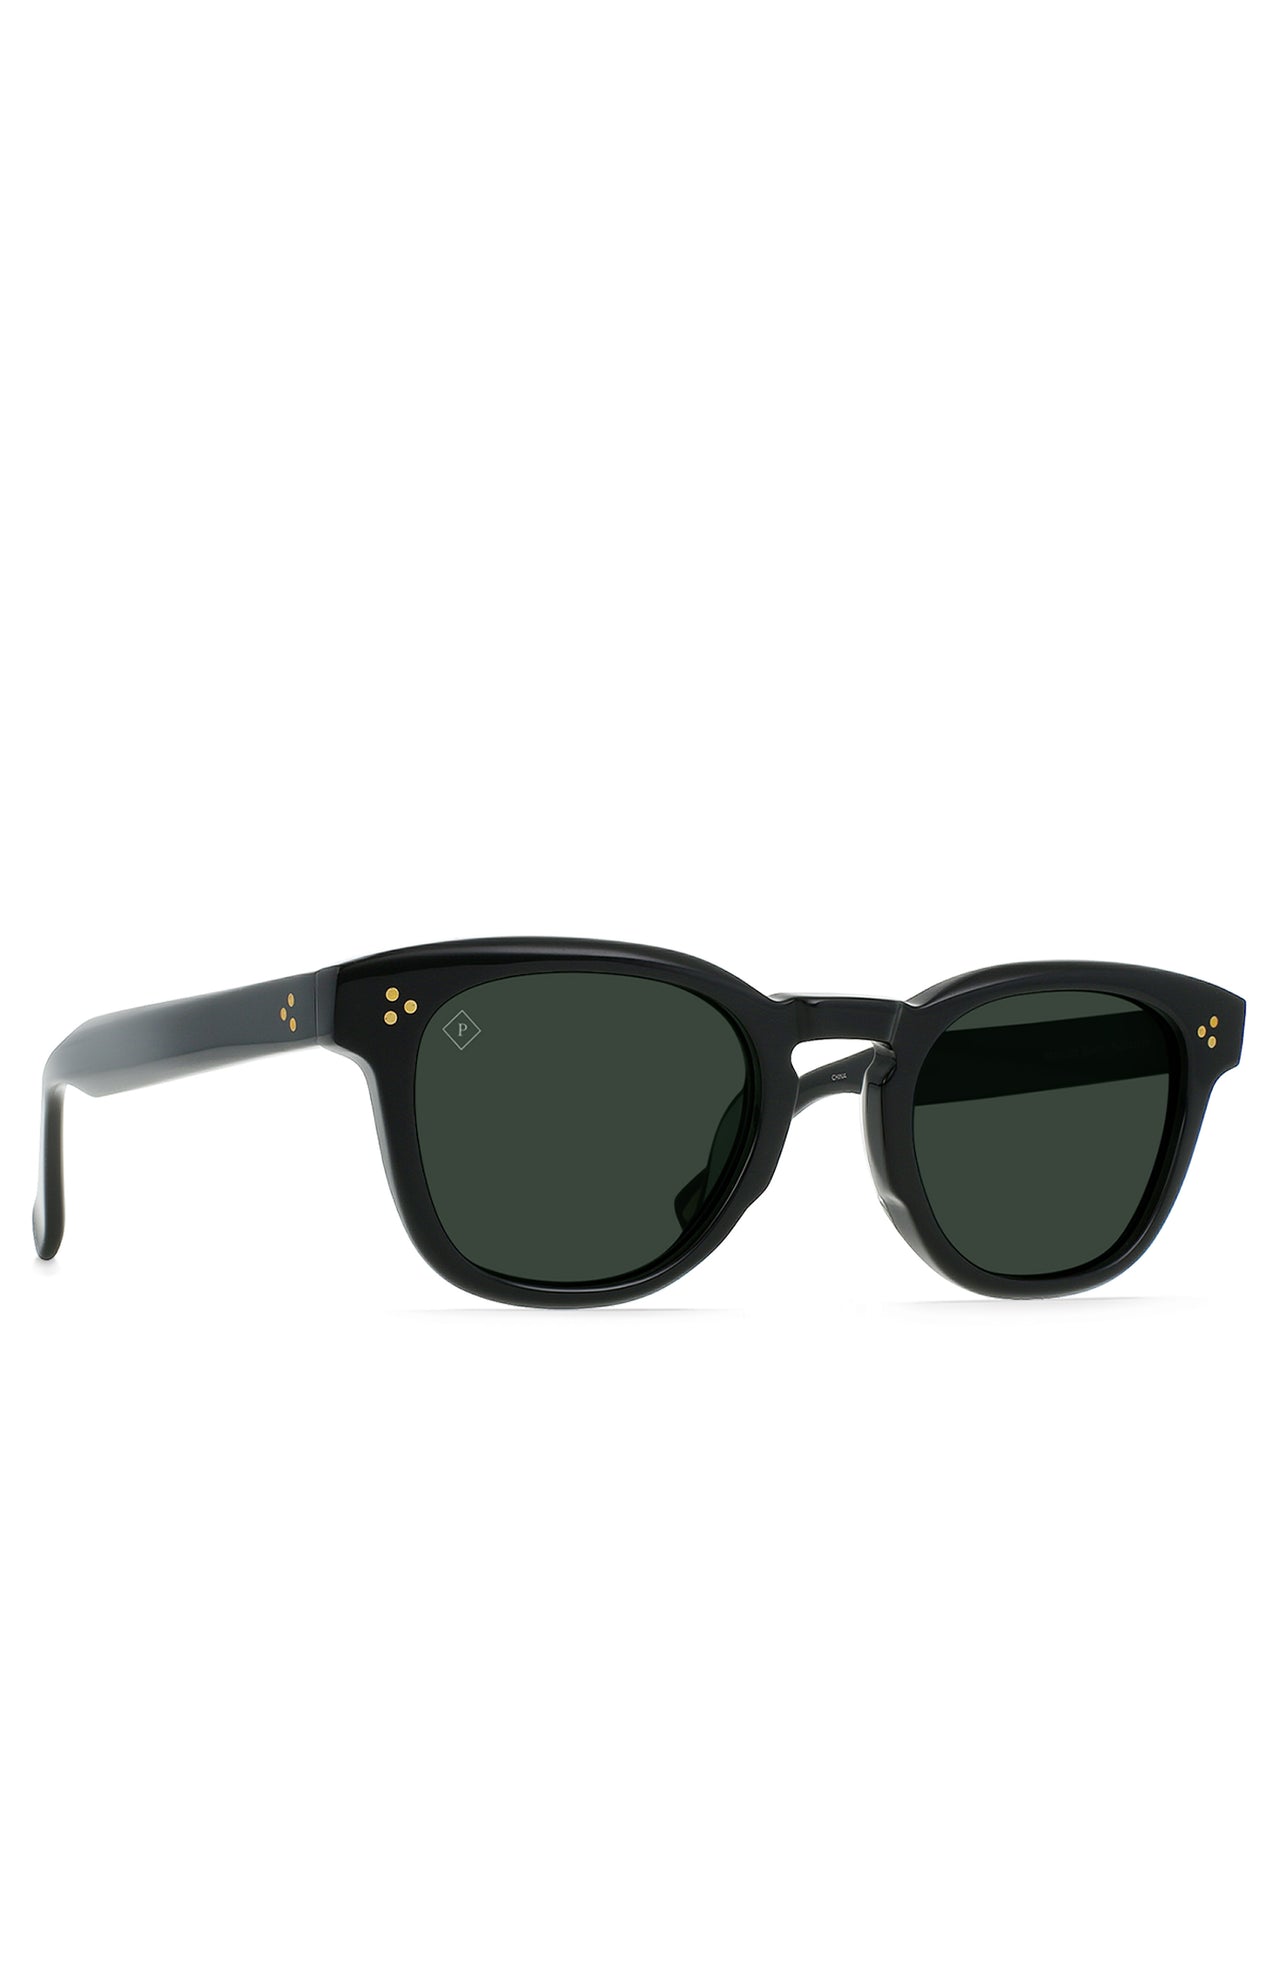 RAEN SQUIRE SUNGLASSES - RECYCLED BLACK/GREEN POLARIZED